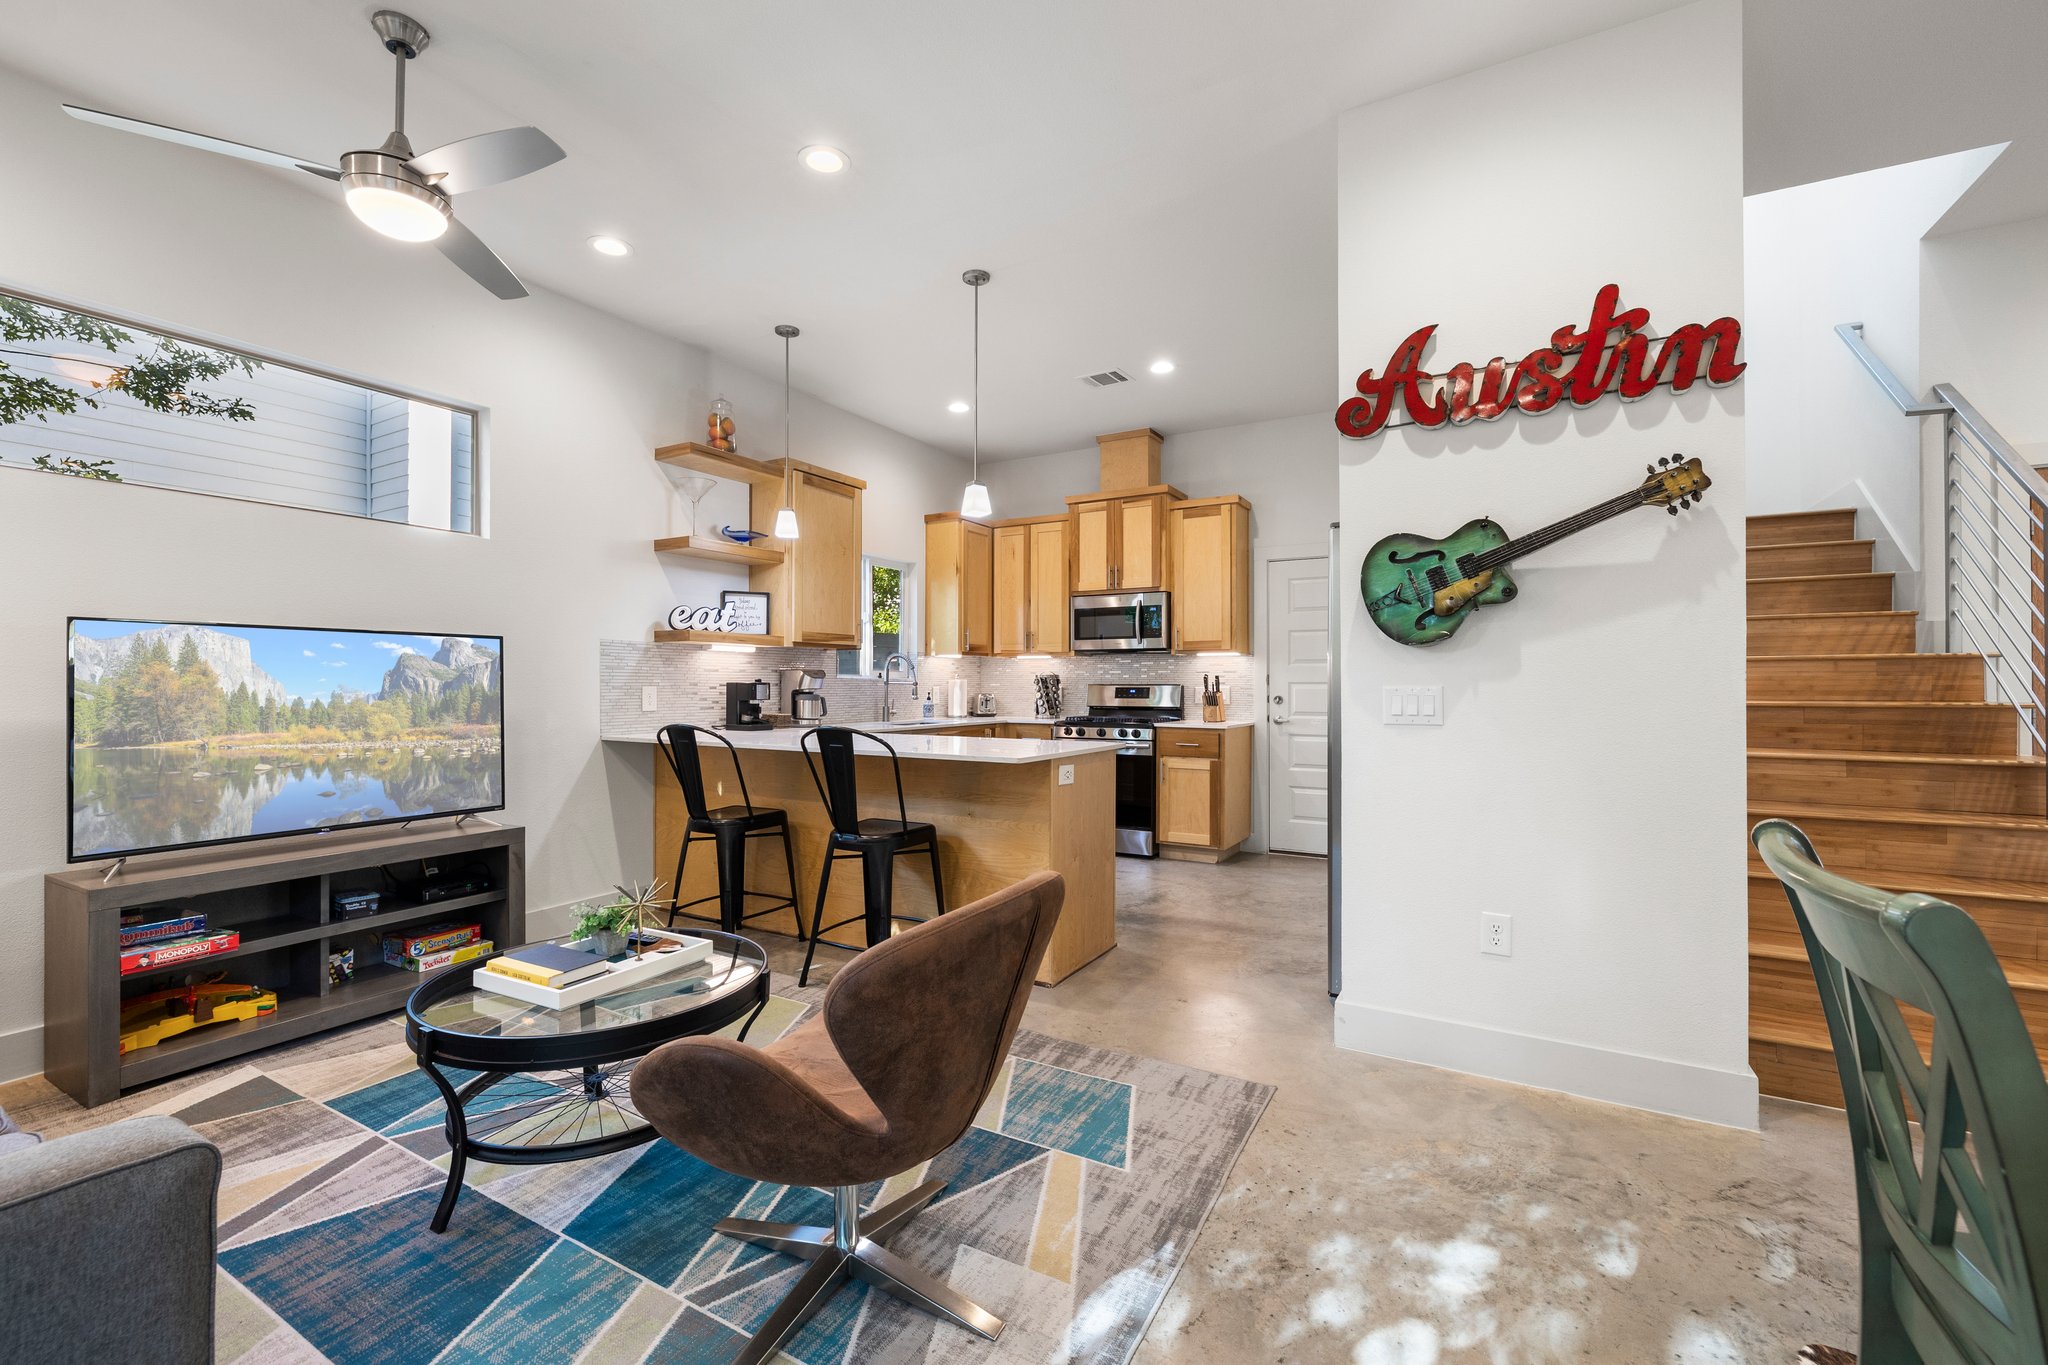 Gorgeous kitchen, relaxing living room, lots of natural light. The "Austin" sign and guitar do not convey (are not included in the sale).